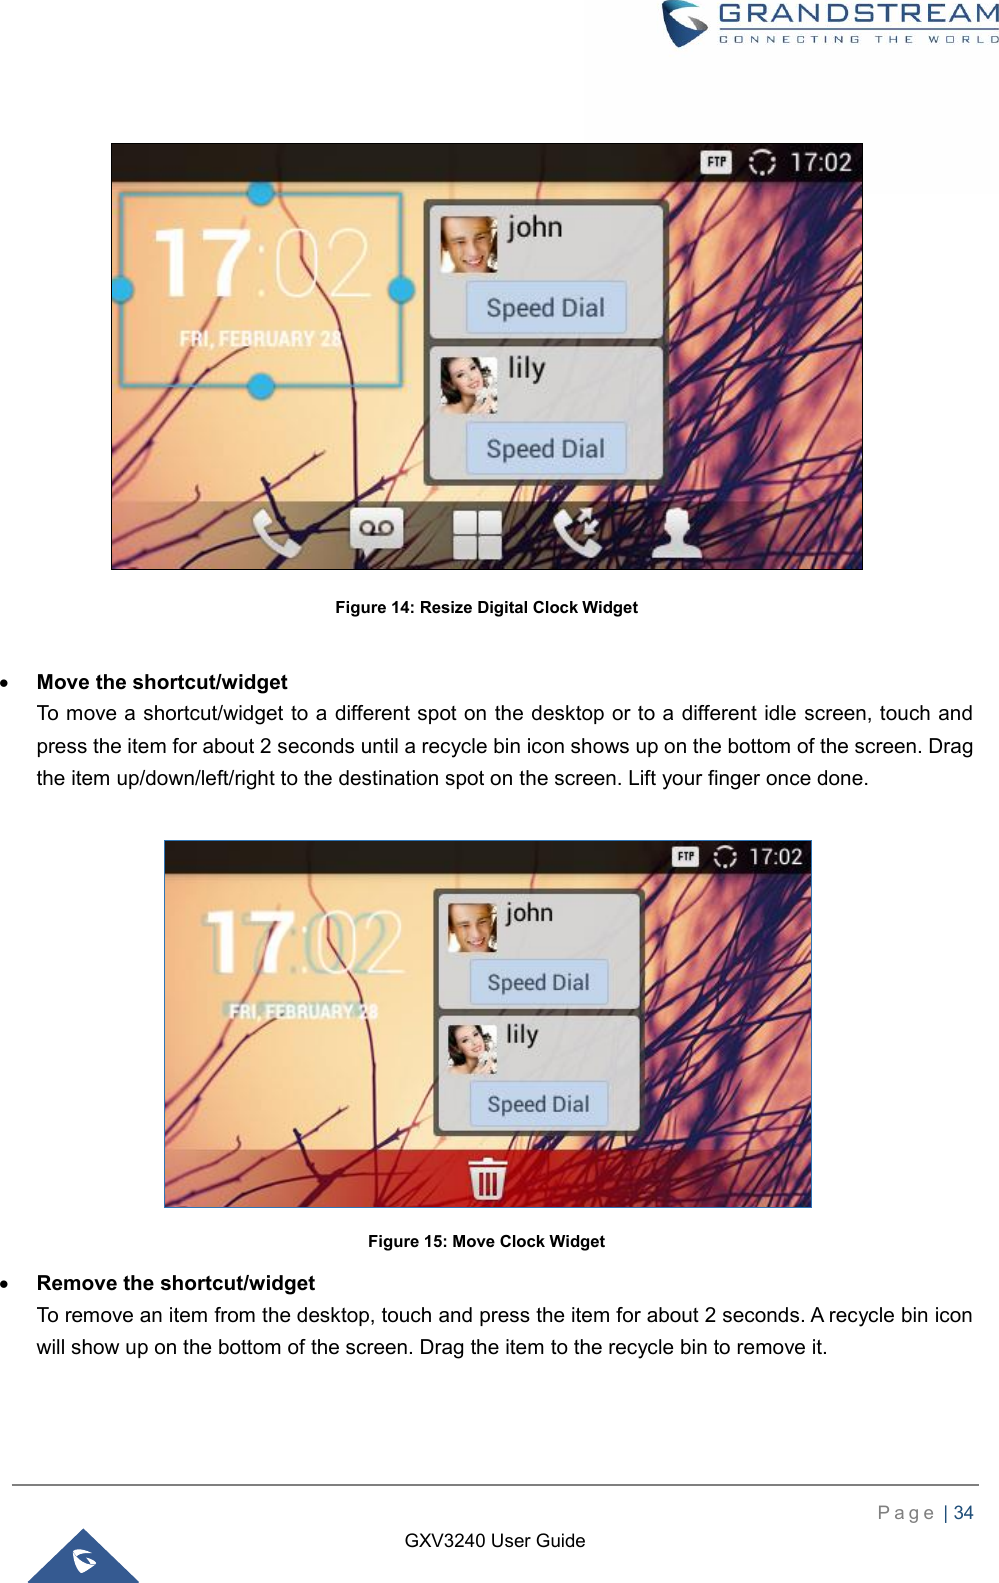    P a g e  | 34    GXV3240 User Guide    Figure 14: Resize Digital Clock Widget   Move the shortcut/widget   To move a shortcut/widget to a different spot on the desktop or to a different idle screen, touch and press the item for about 2 seconds until a recycle bin icon shows up on the bottom of the screen. Drag the item up/down/left/right to the destination spot on the screen. Lift your finger once done.   Figure 15: Move Clock Widget  Remove the shortcut/widget To remove an item from the desktop, touch and press the item for about 2 seconds. A recycle bin icon will show up on the bottom of the screen. Drag the item to the recycle bin to remove it. 